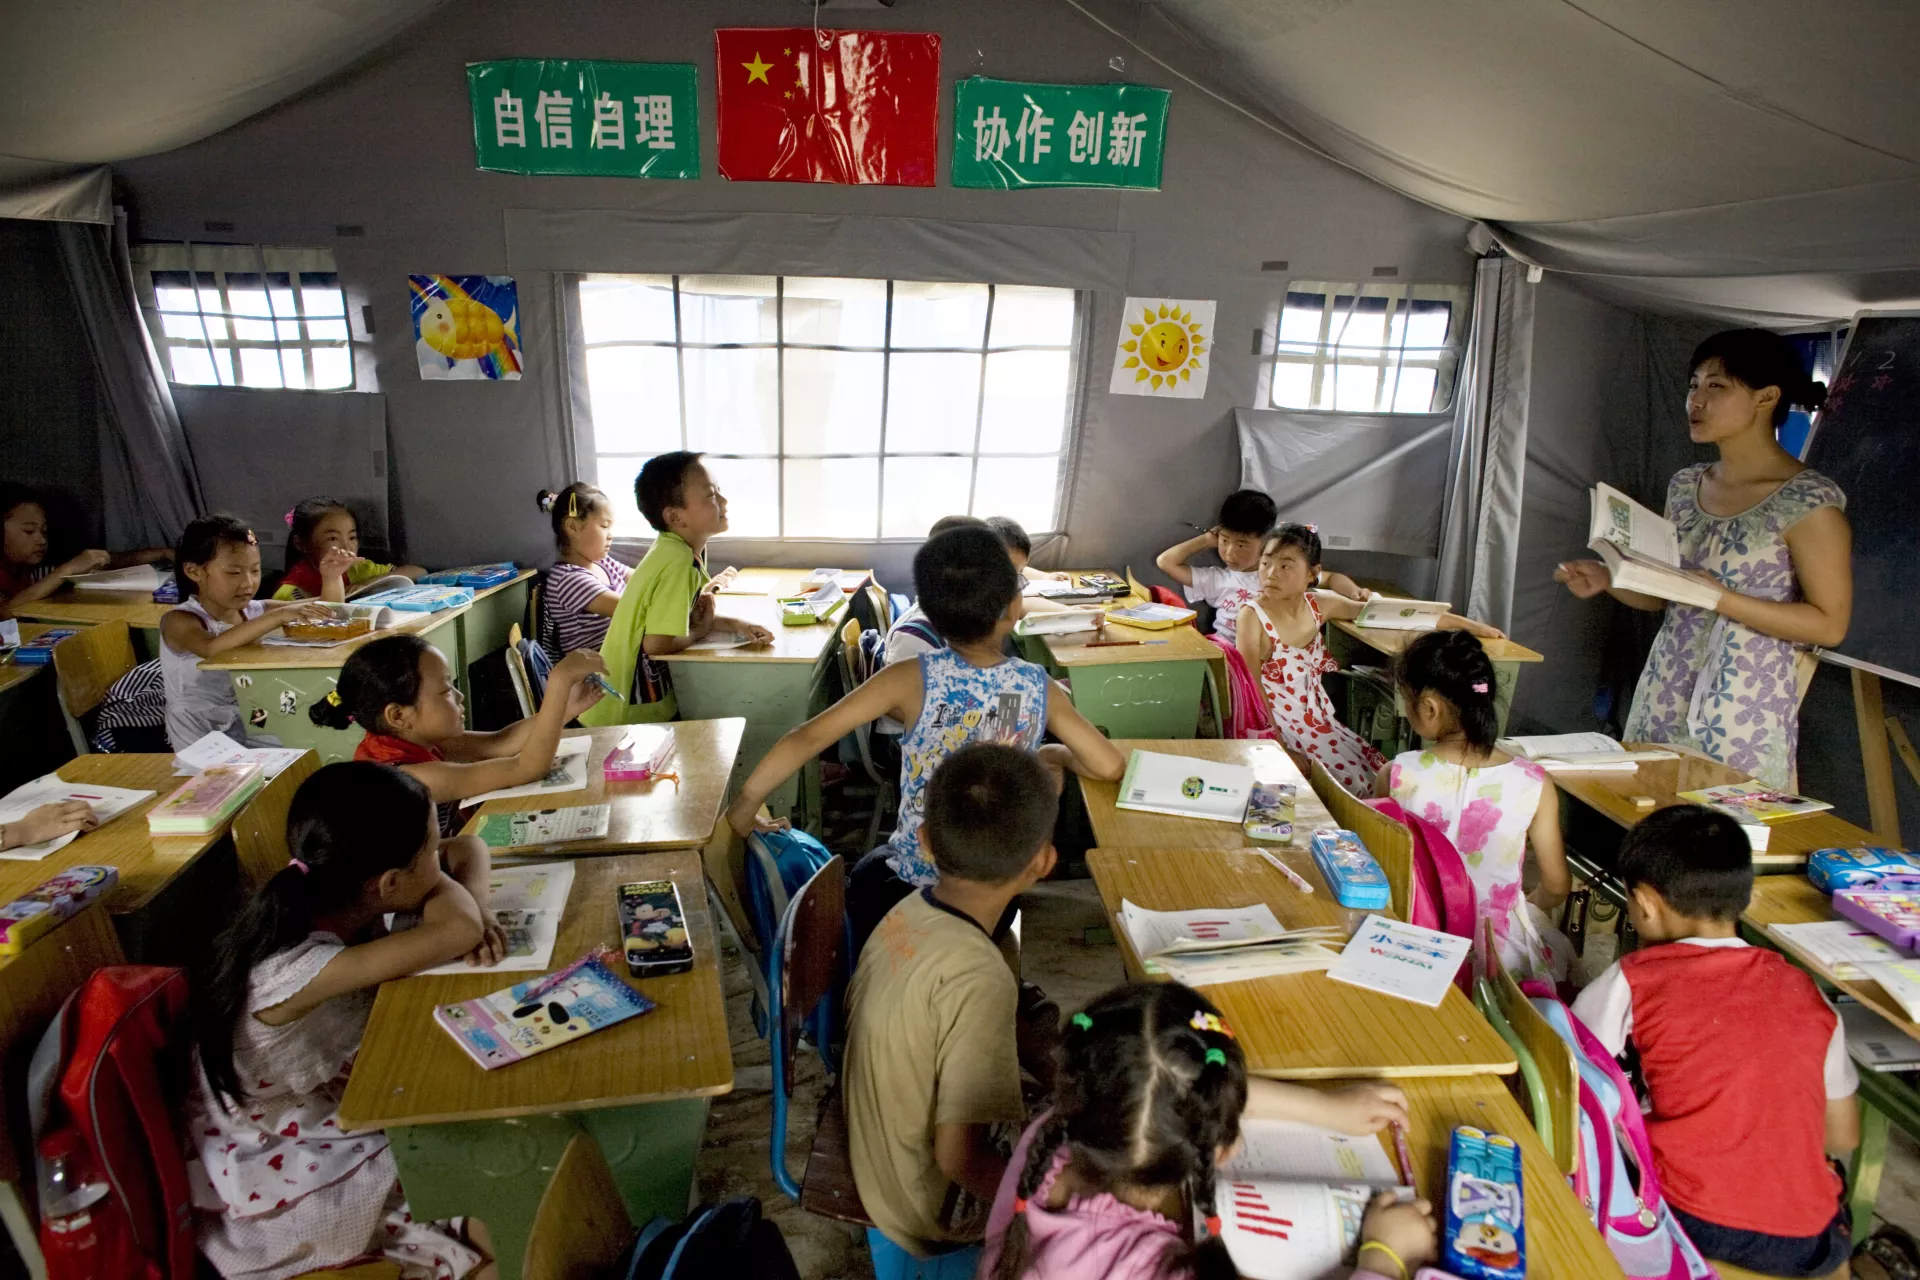 Children attend school in a tent classroom in the city of Mianyang in Sichuan Province. UNICEF has provided portable latrines at the temporary school. The city is in one of the areas hardest hit by the earthquake.